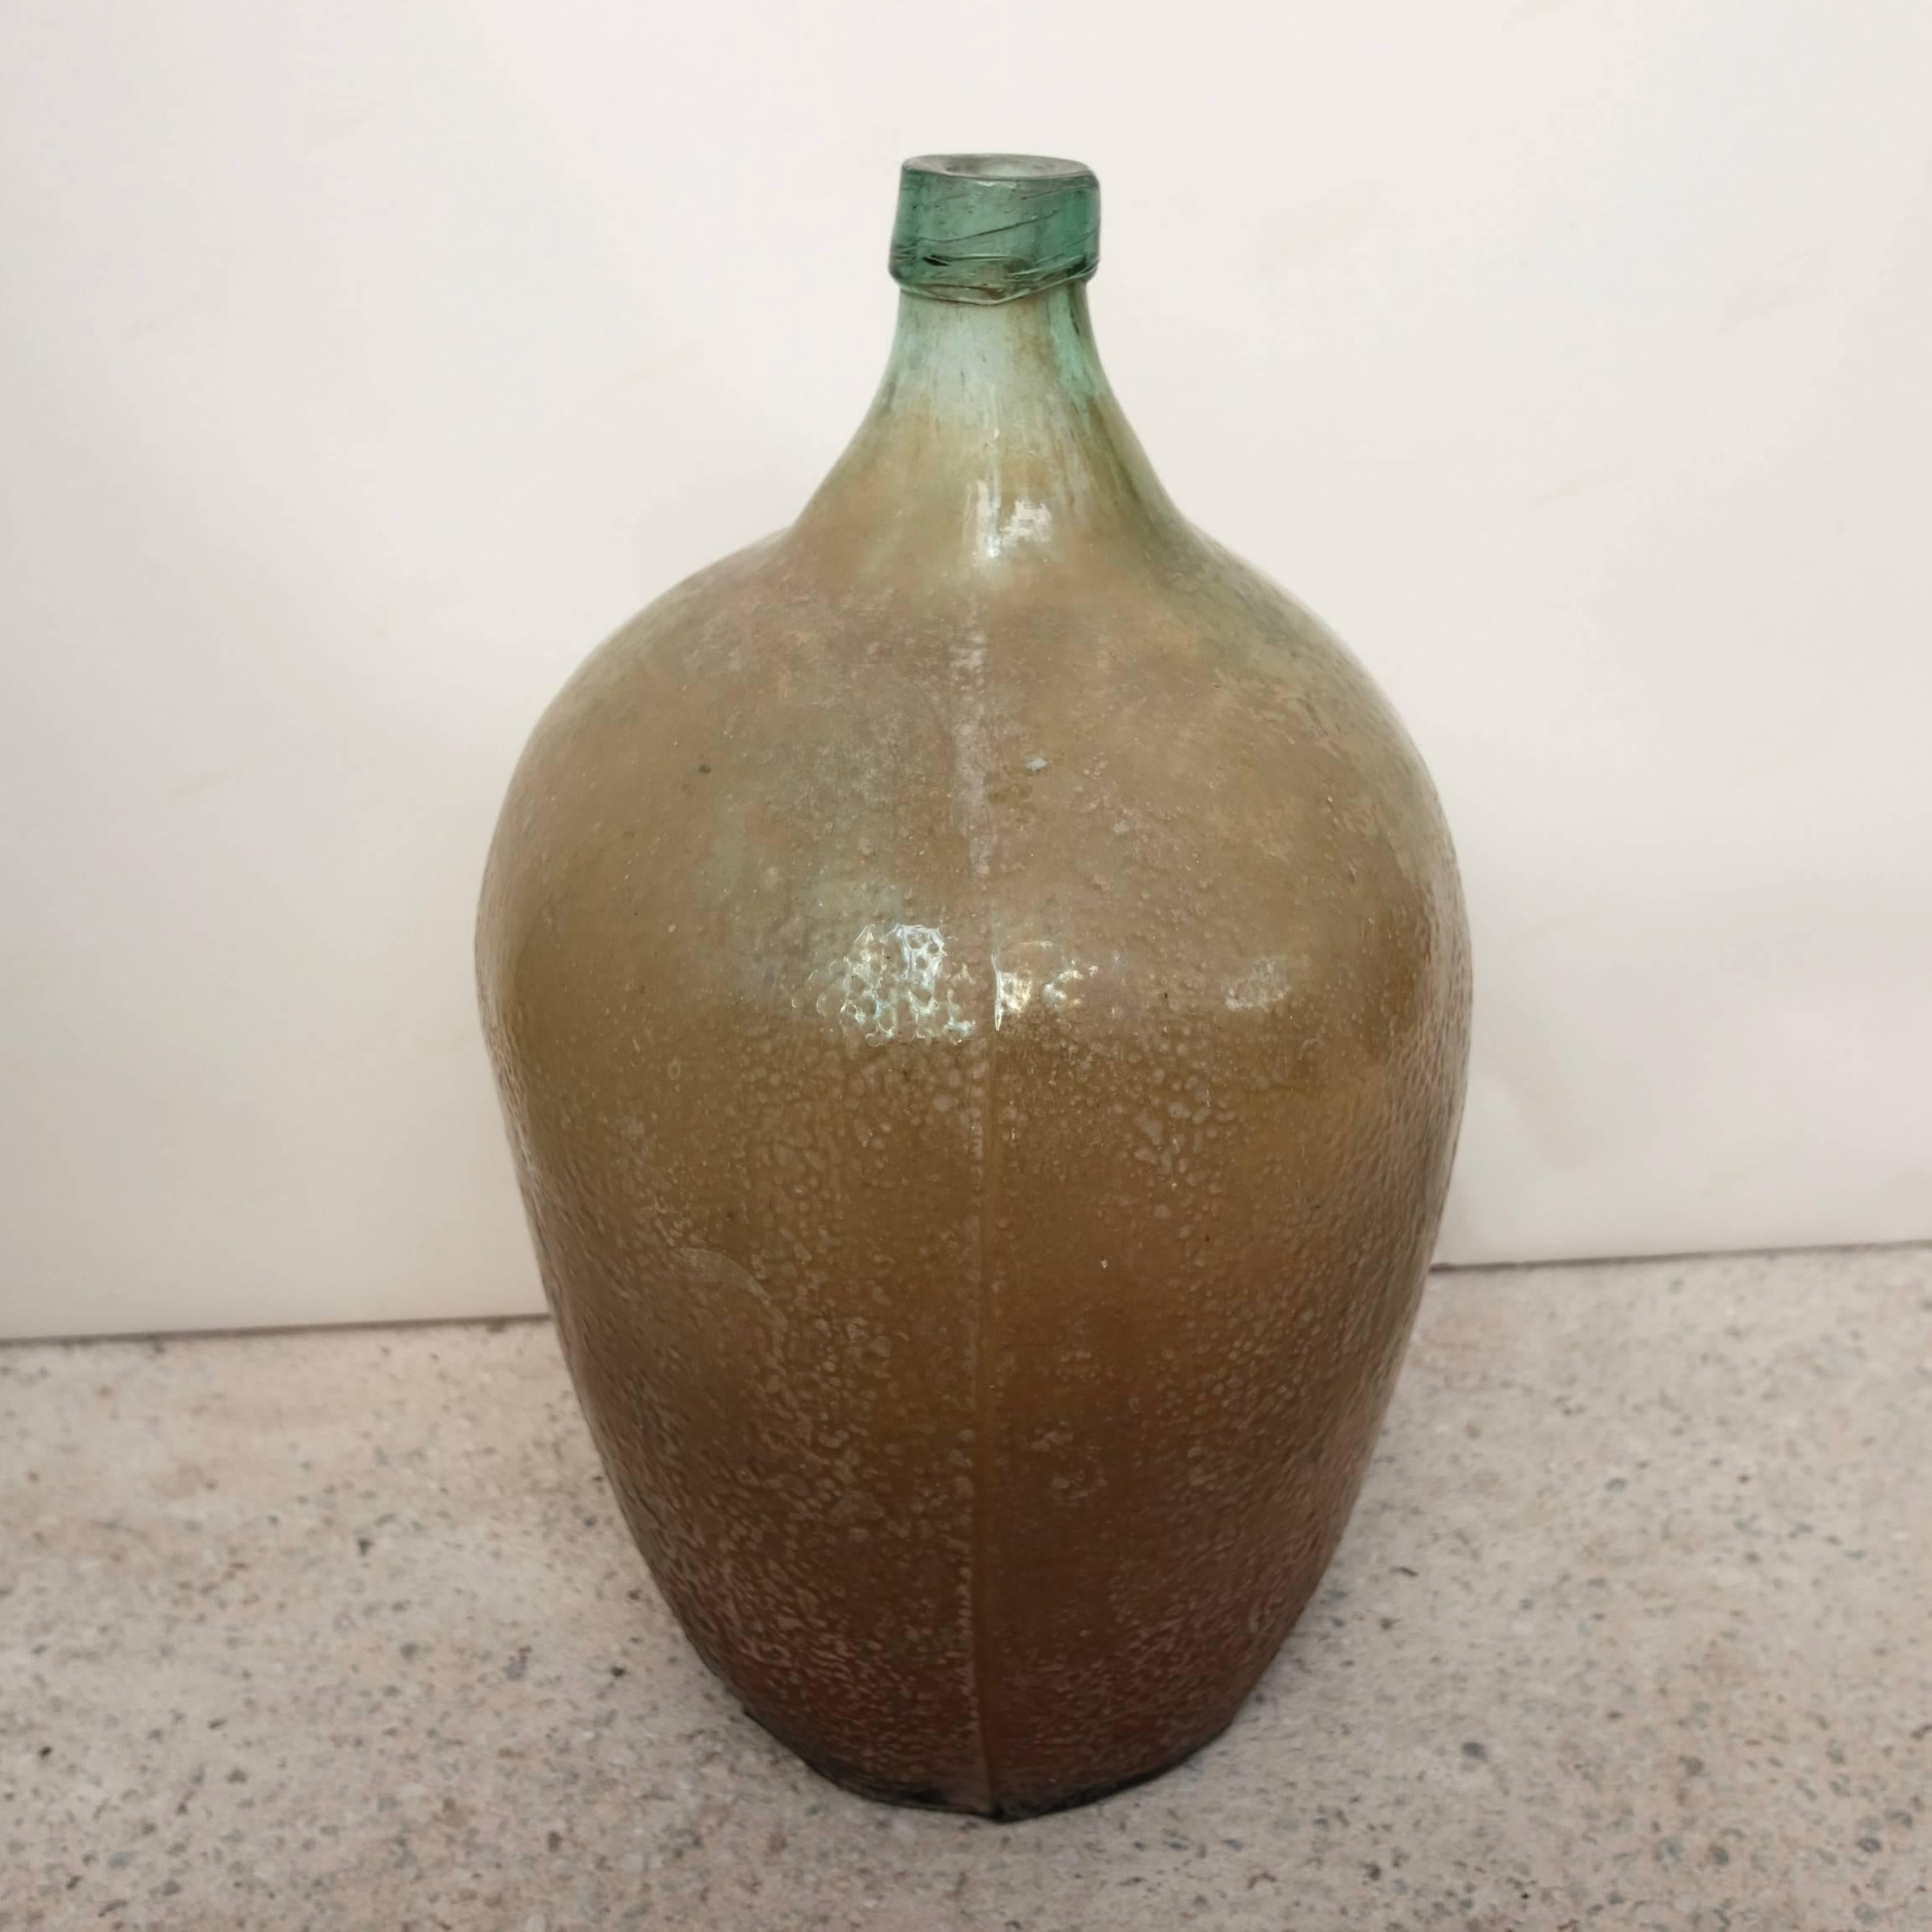 Rare, Vintage glass jug for storing mezcal from Southern Oaxaca. The imperfections on the bottle give these mezcal vessels their natural beauty.